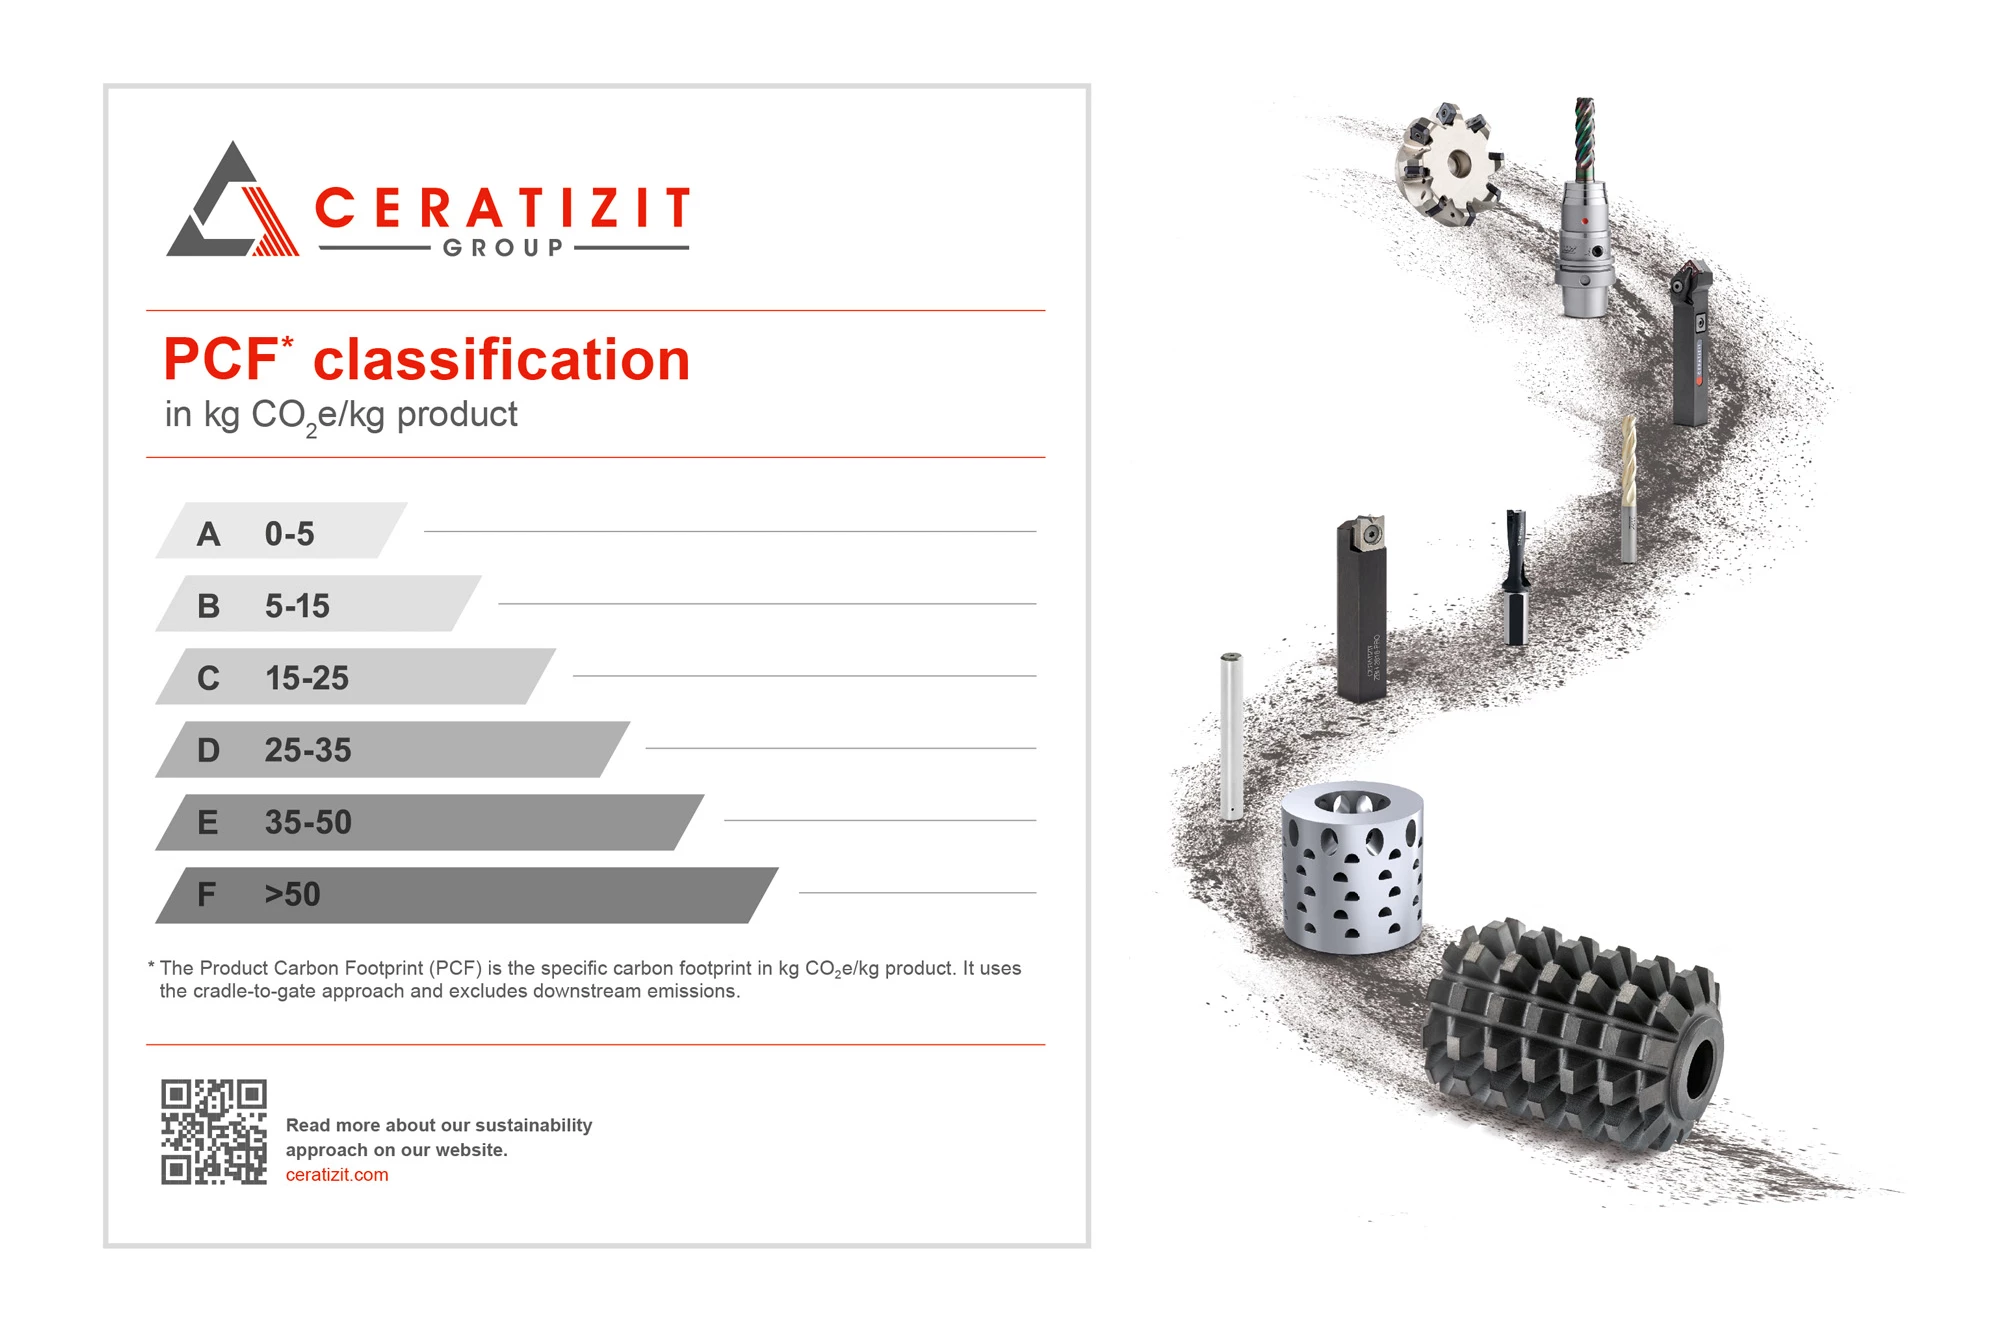 CERATIZIT launches the first PCF standard for cemented carbide